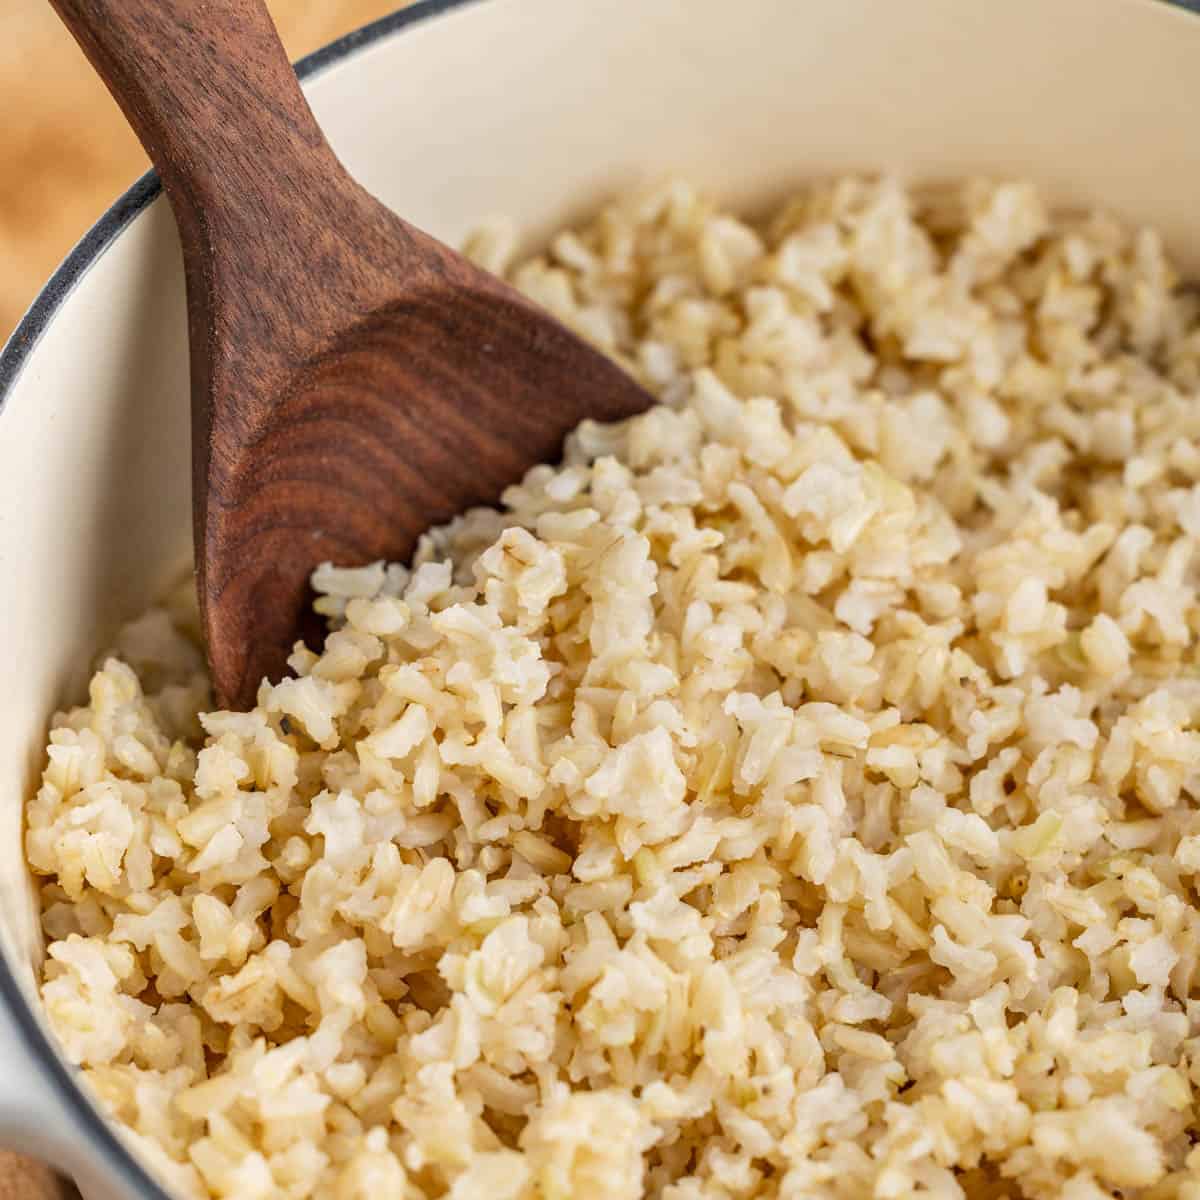 How to make brown rice.